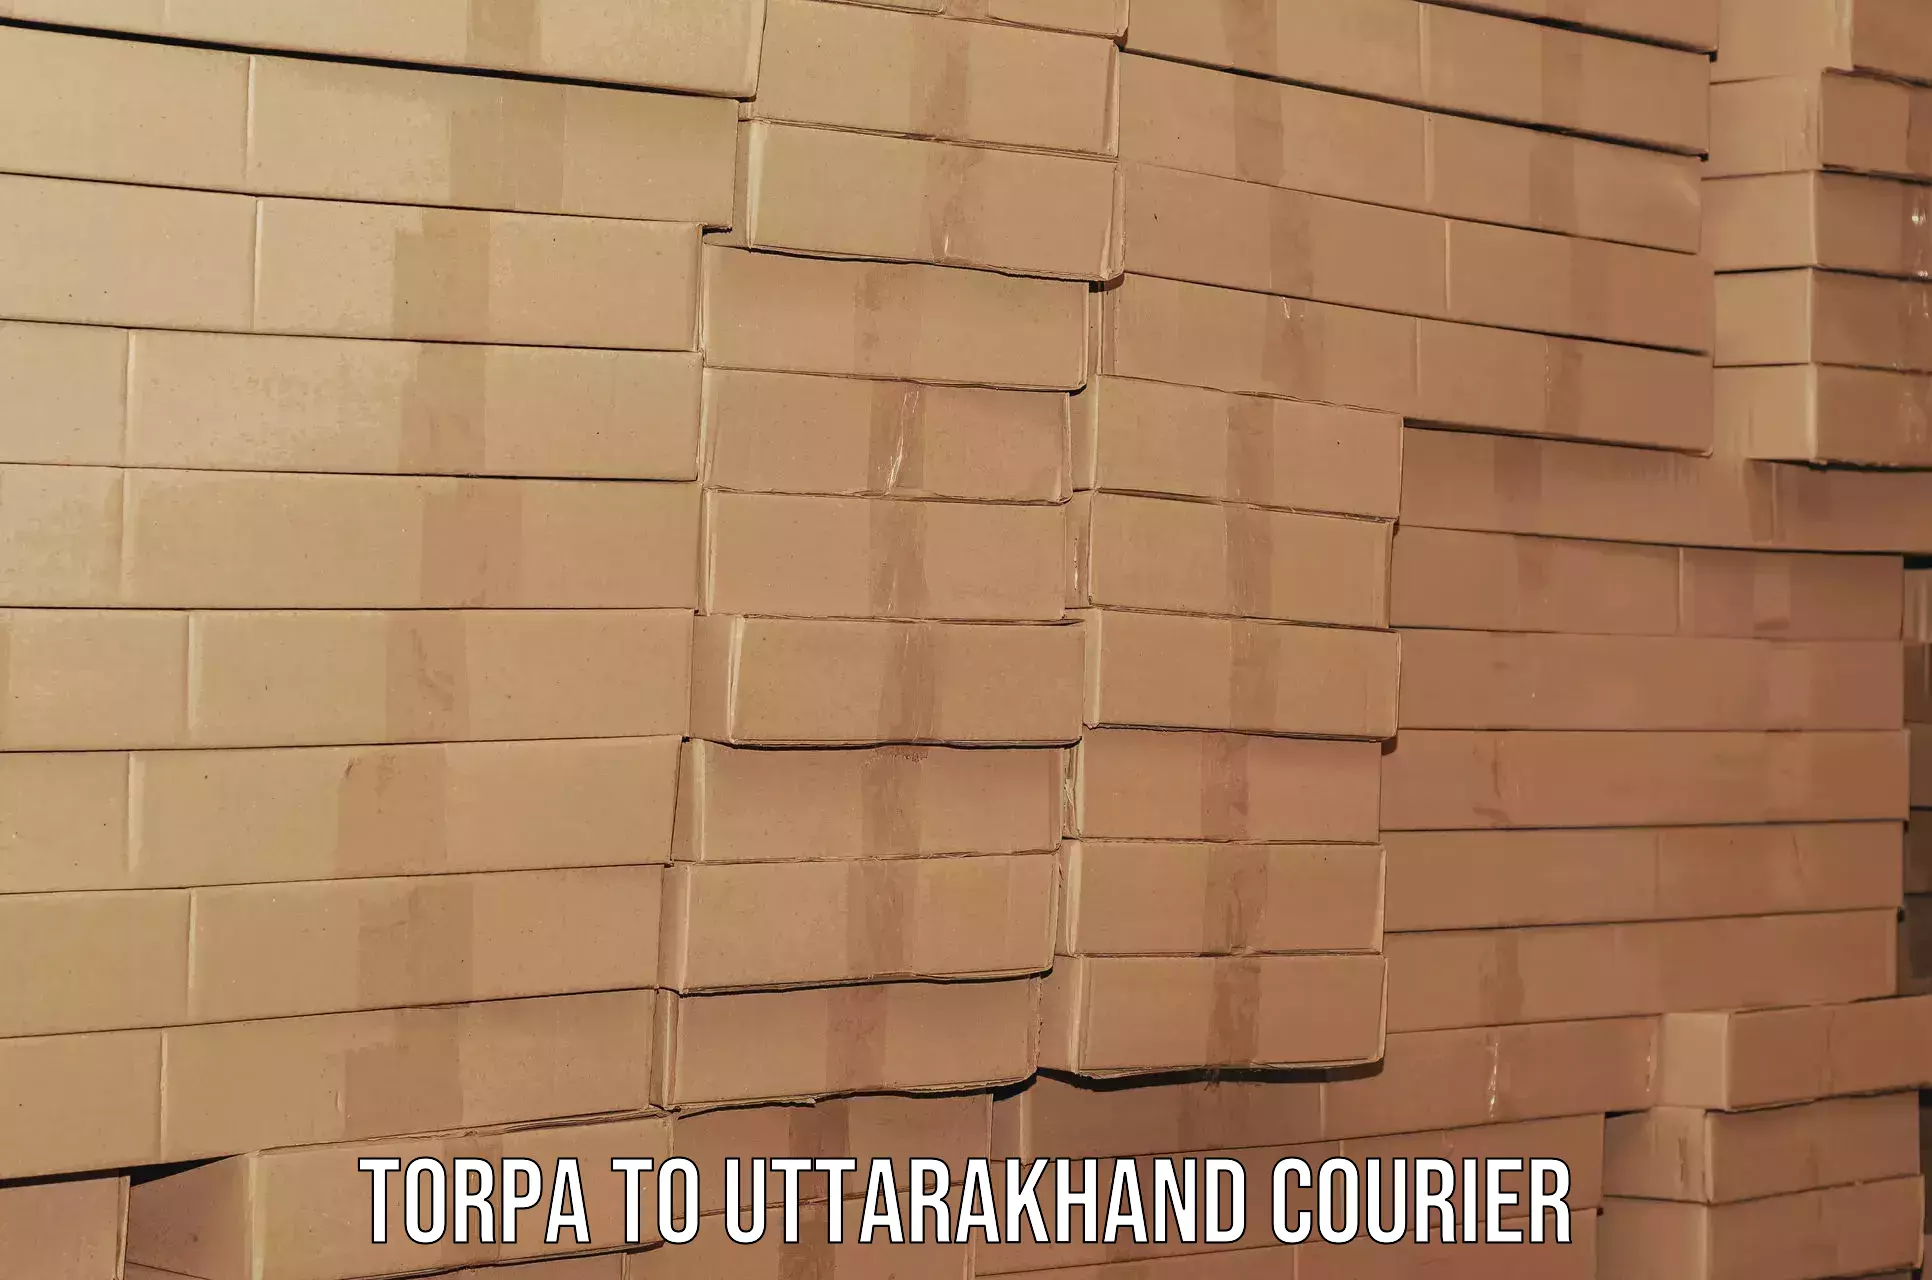 Moving and handling services Torpa to Gopeshwar